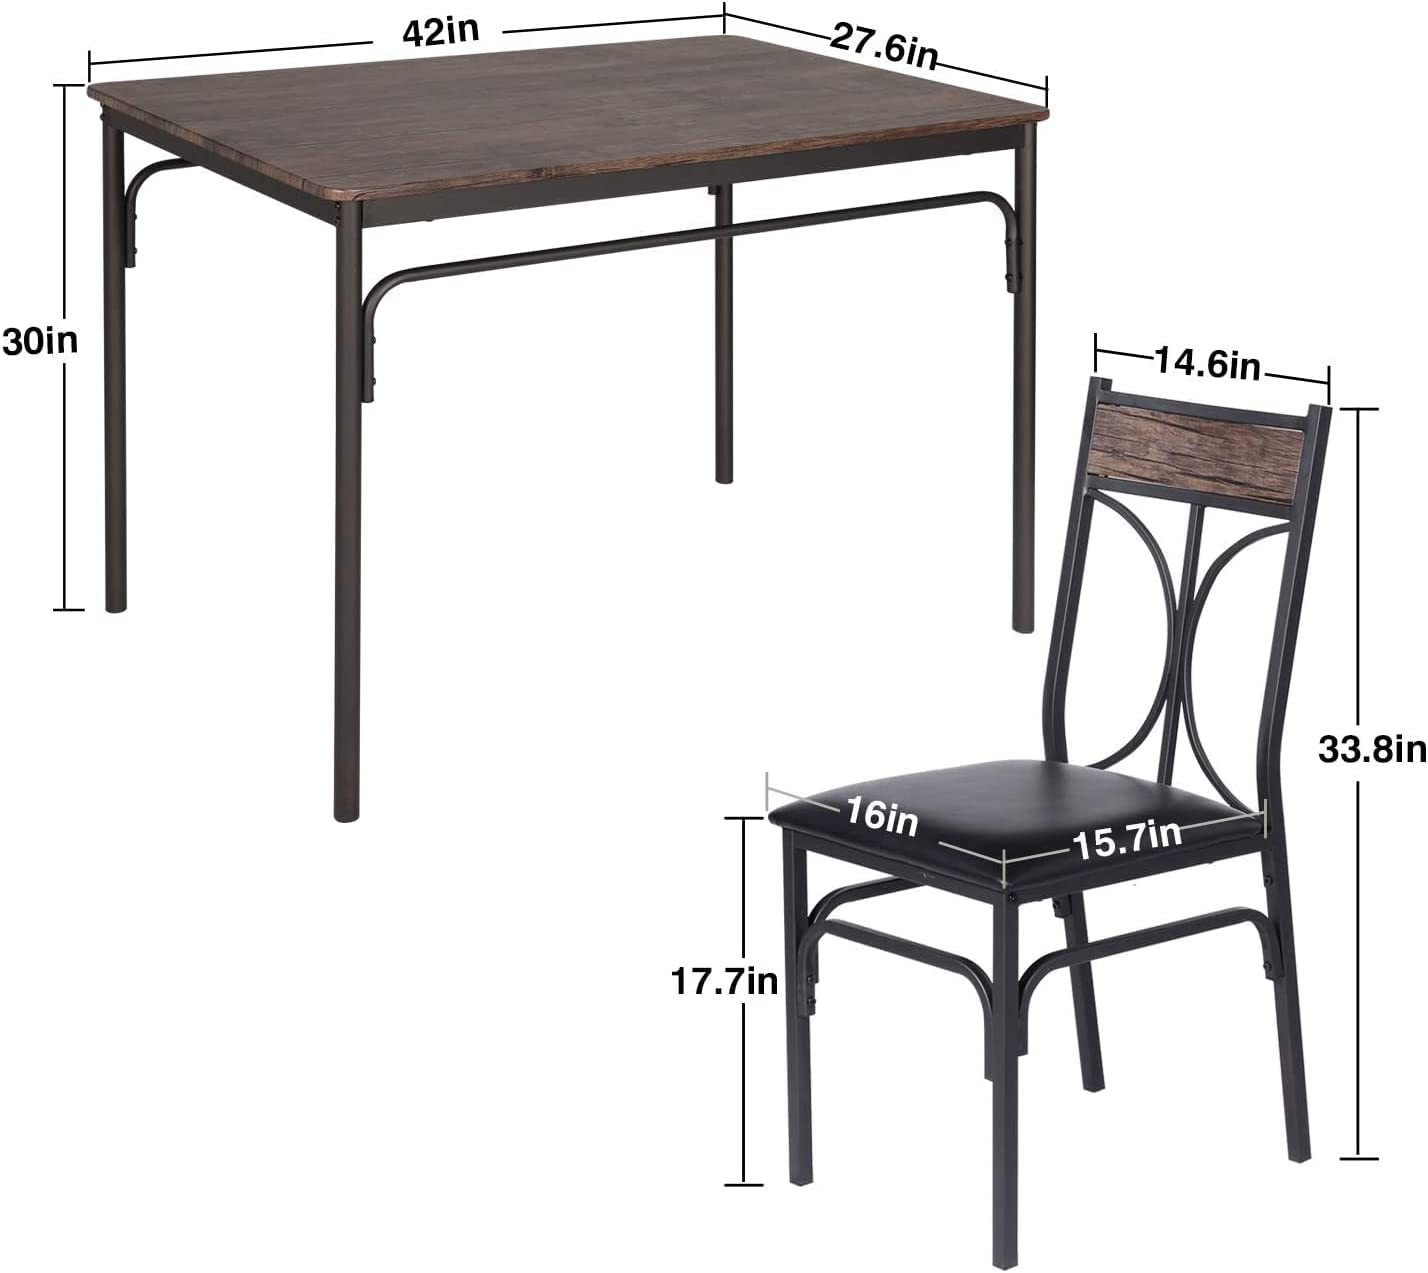 VECELO Industrial 5-Piece Modern Rectangular Dining Table Set with 4 Chairs